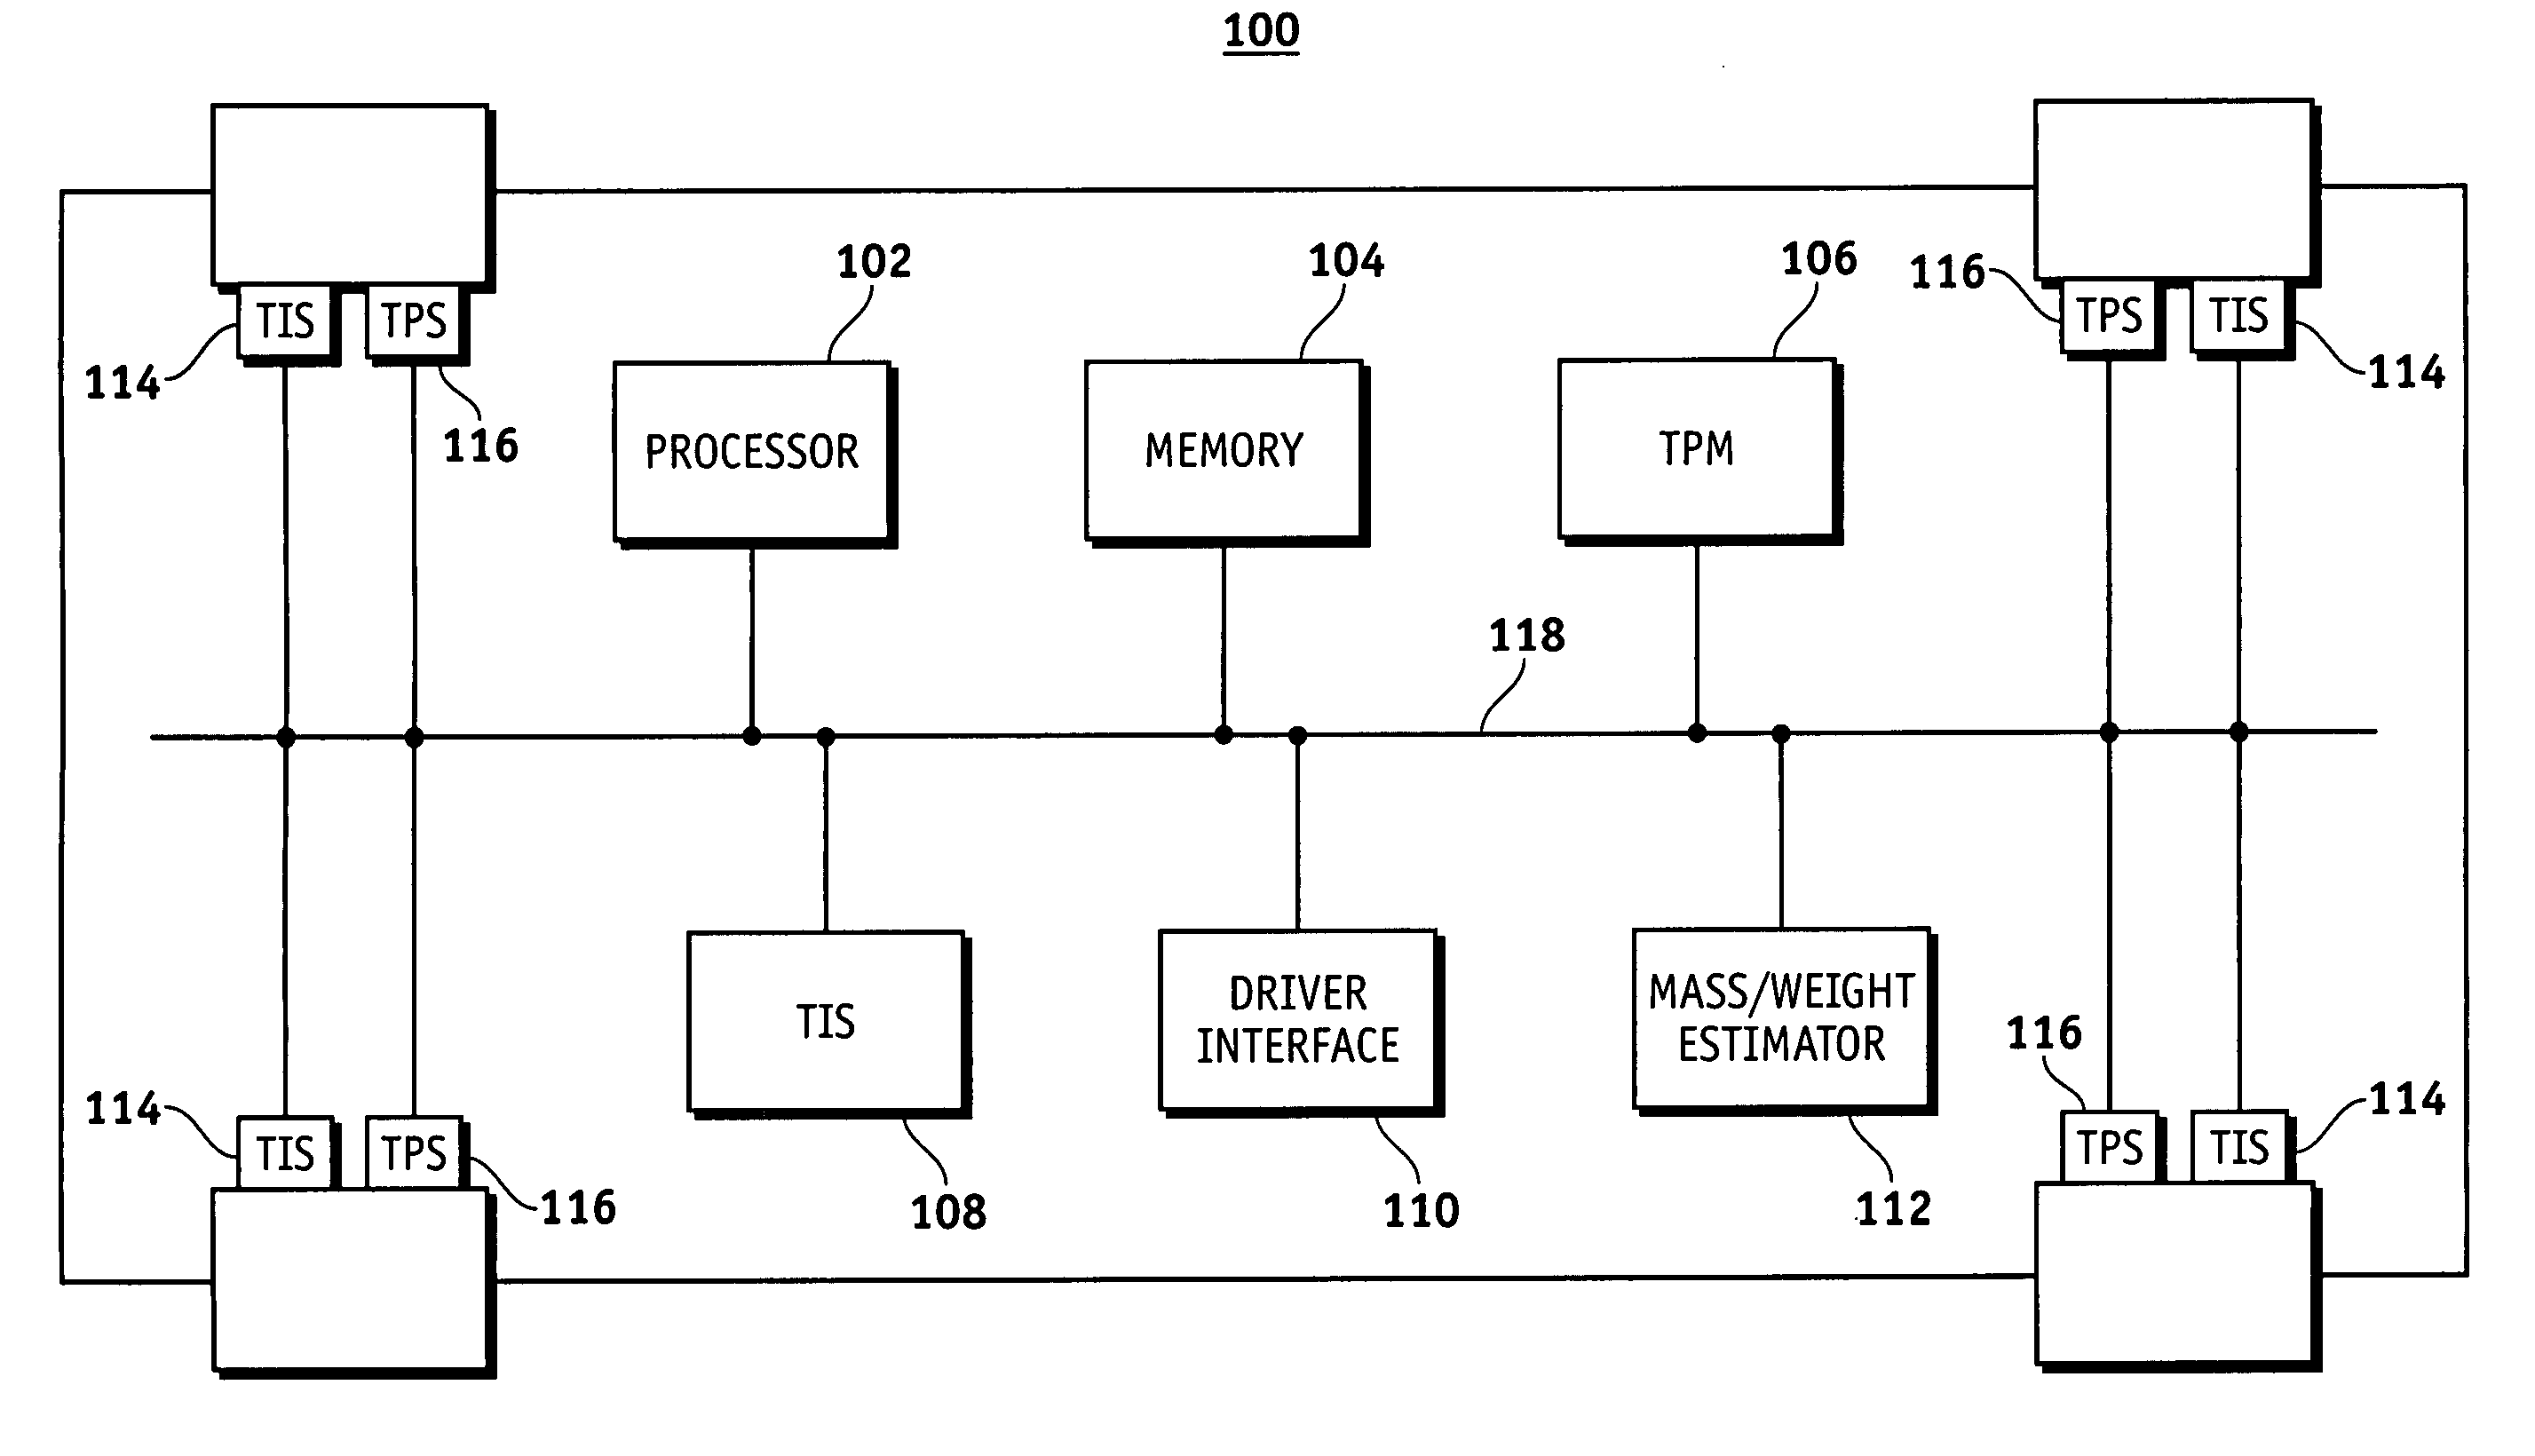 System and method for determining proper tire inflation pressure based on current vehicle mass conditions